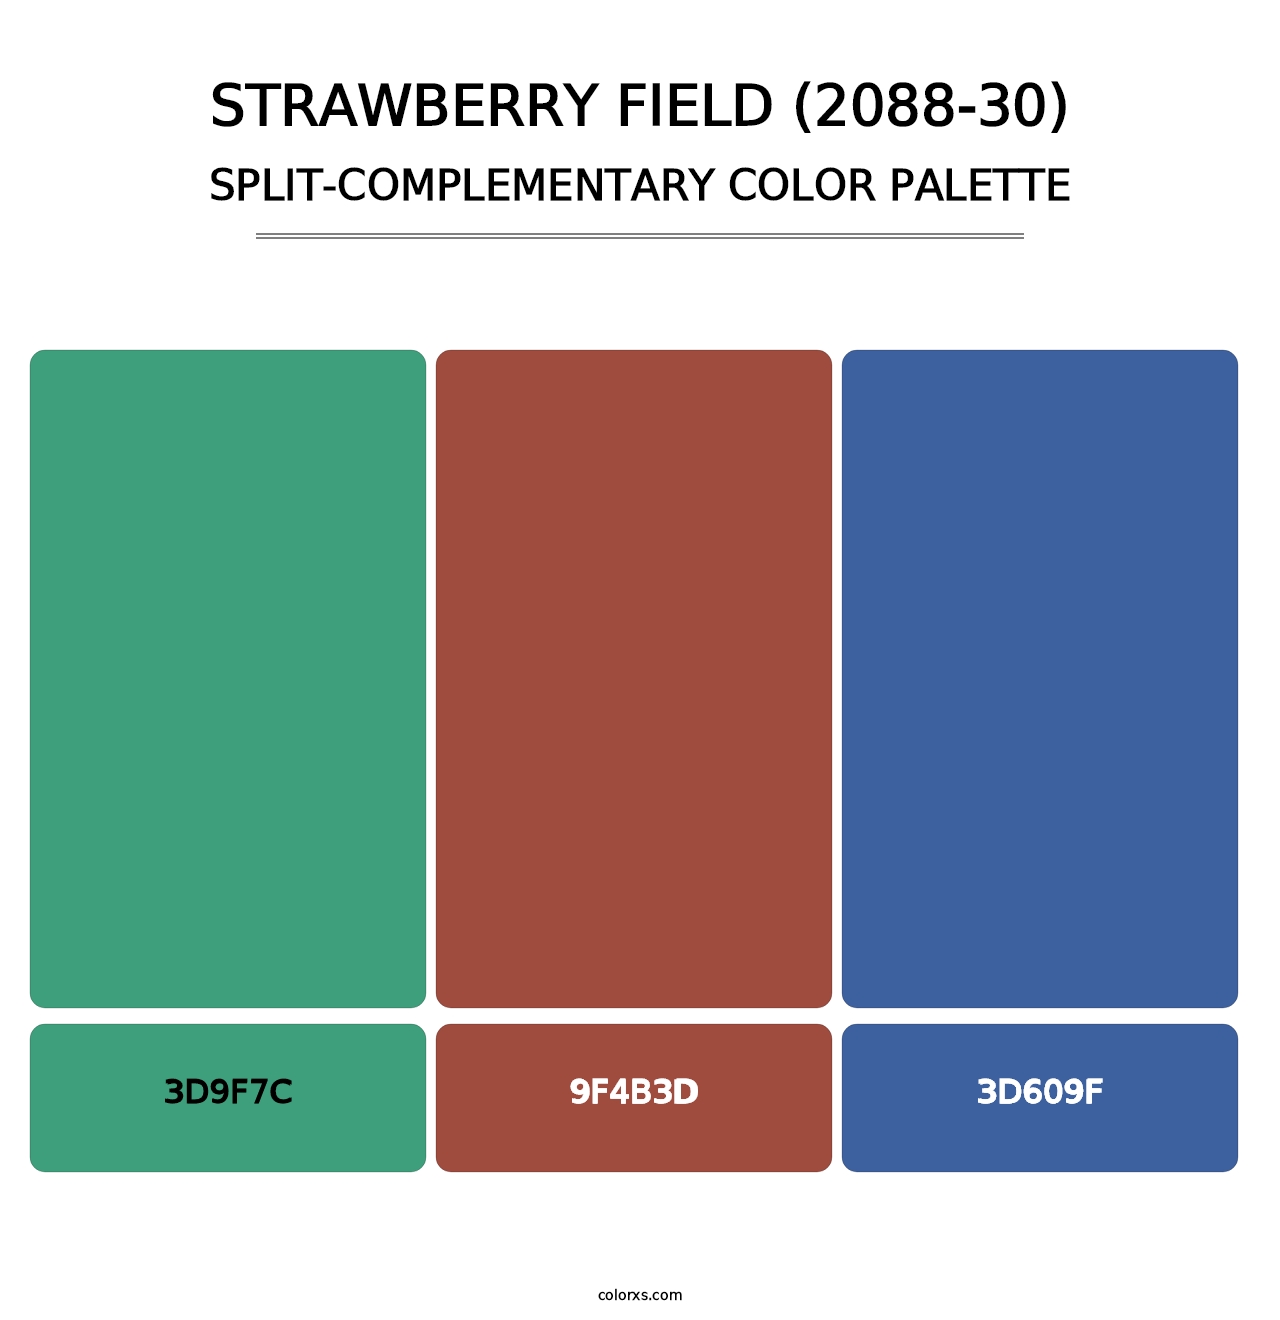 Strawberry Field (2088-30) - Split-Complementary Color Palette